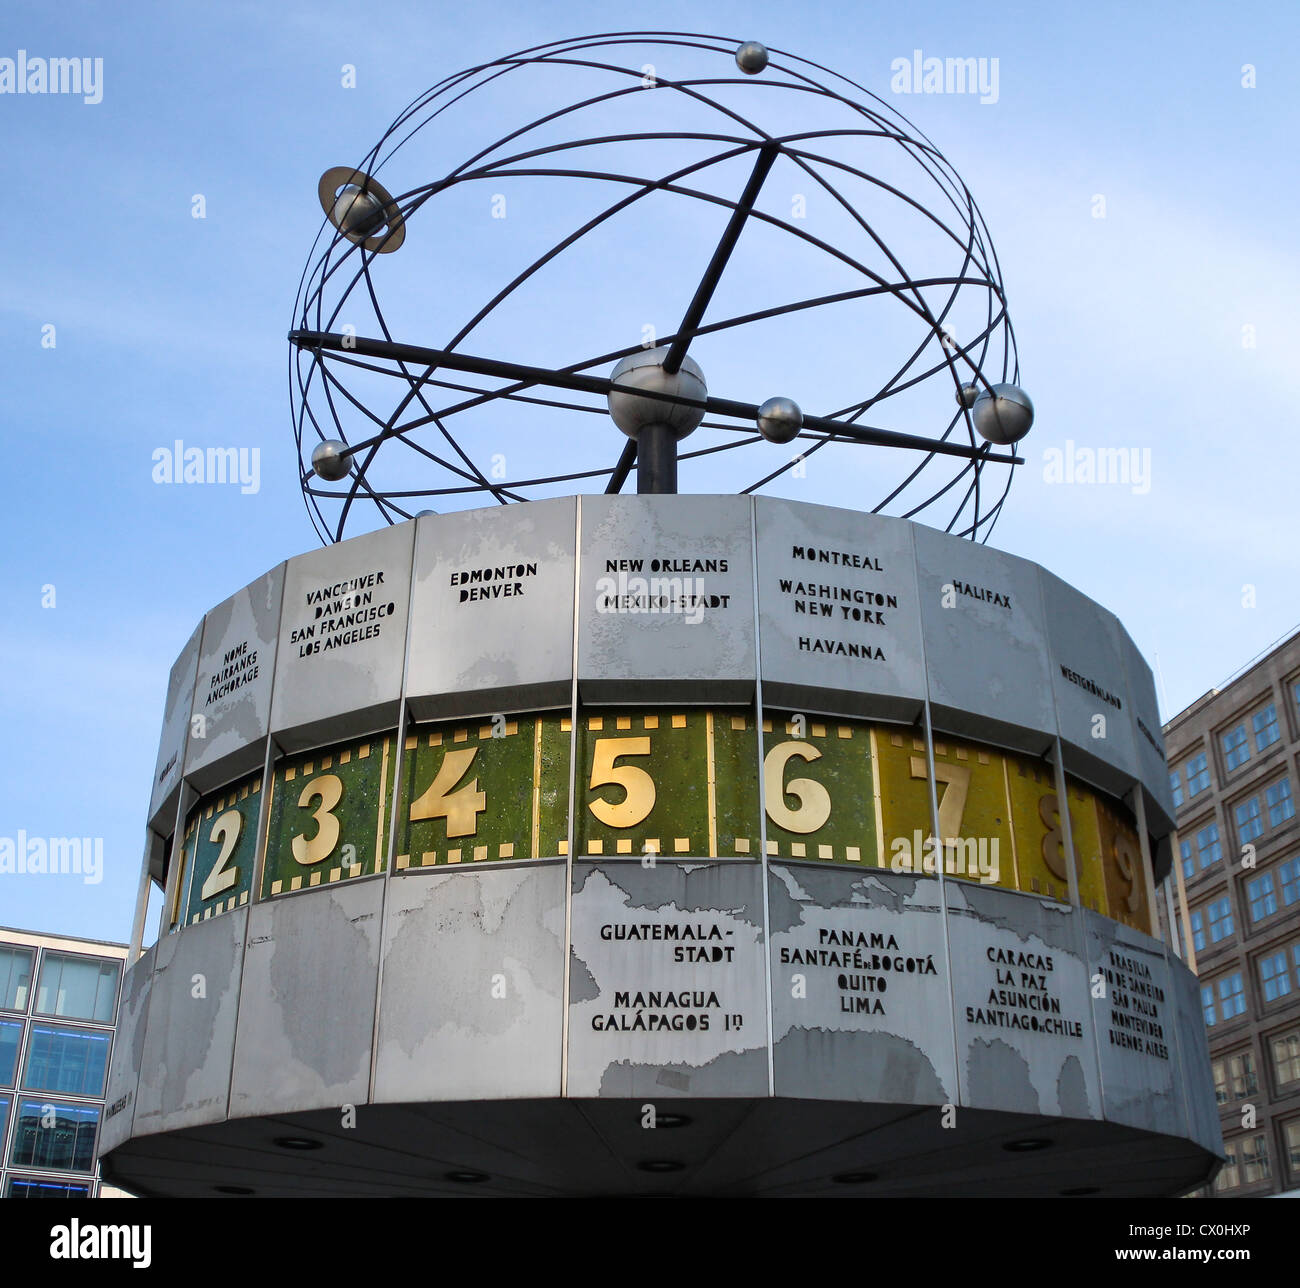 The clock in the world built by Eric John to Alexanderplatz in Berlin, Germany Stock Photo